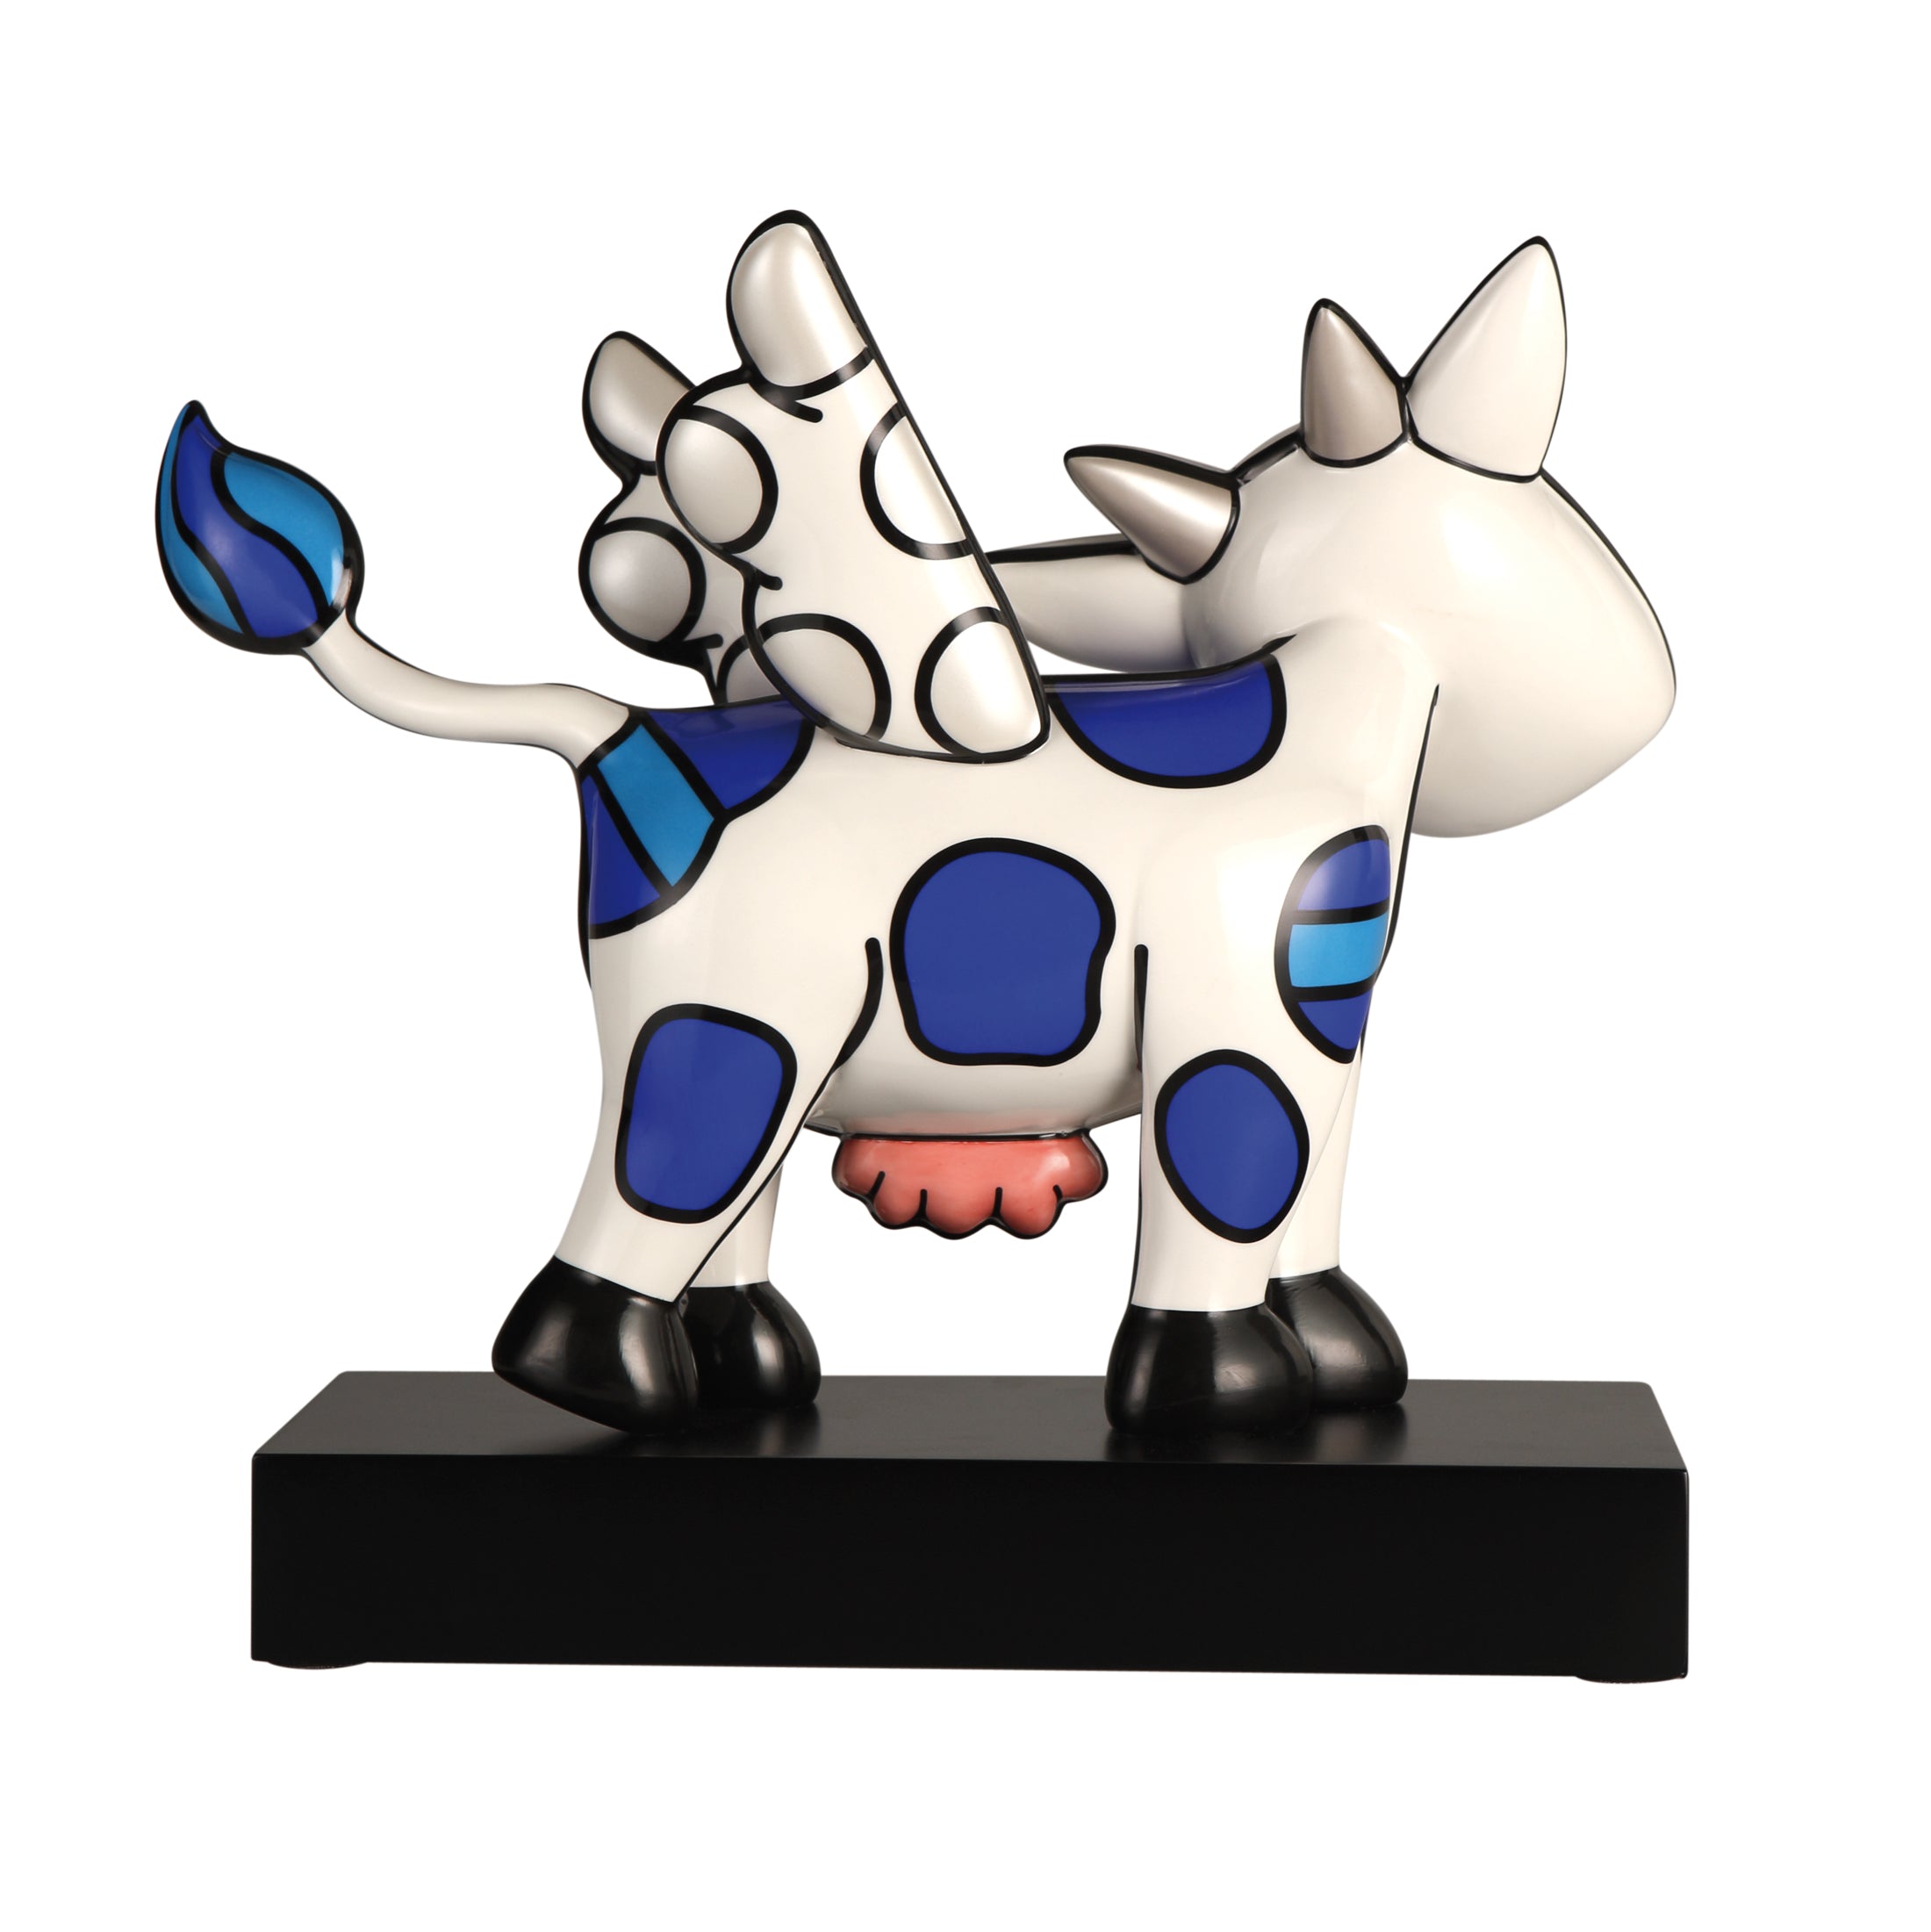 Goebel-by-Britto-Figur-Flying-Cow-limited-edition-berlindeluxe-kuh-blau-punkte-hinten